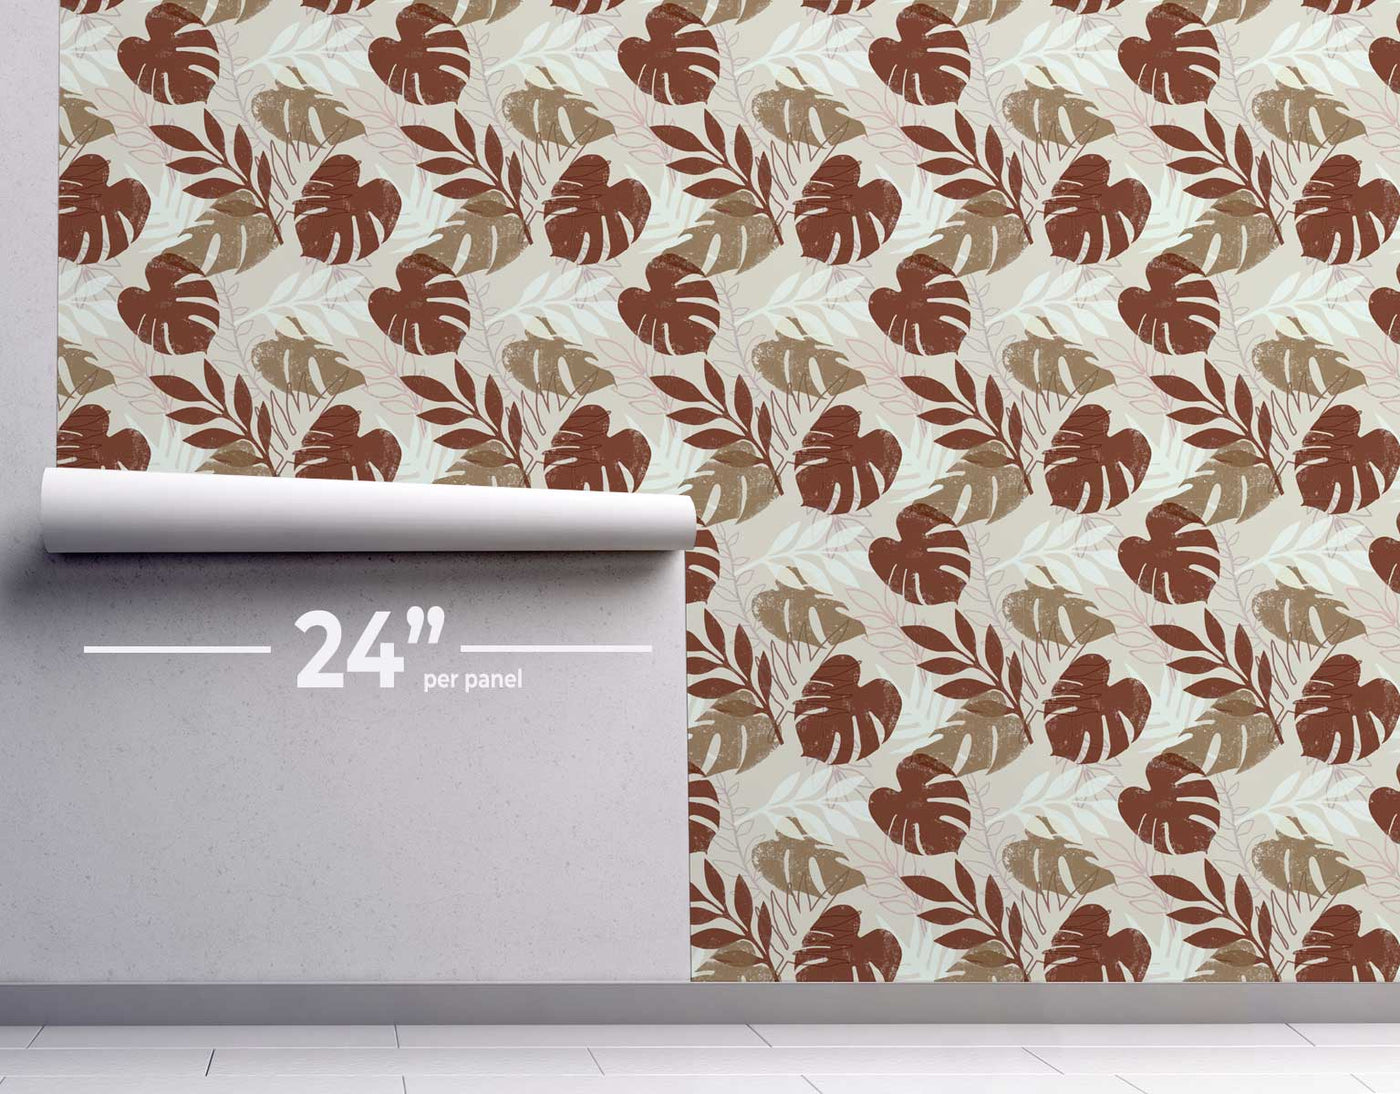 South Tropical Leaves Wallpaper #456-Repeat Pattern Wallpaper-Eazywallz